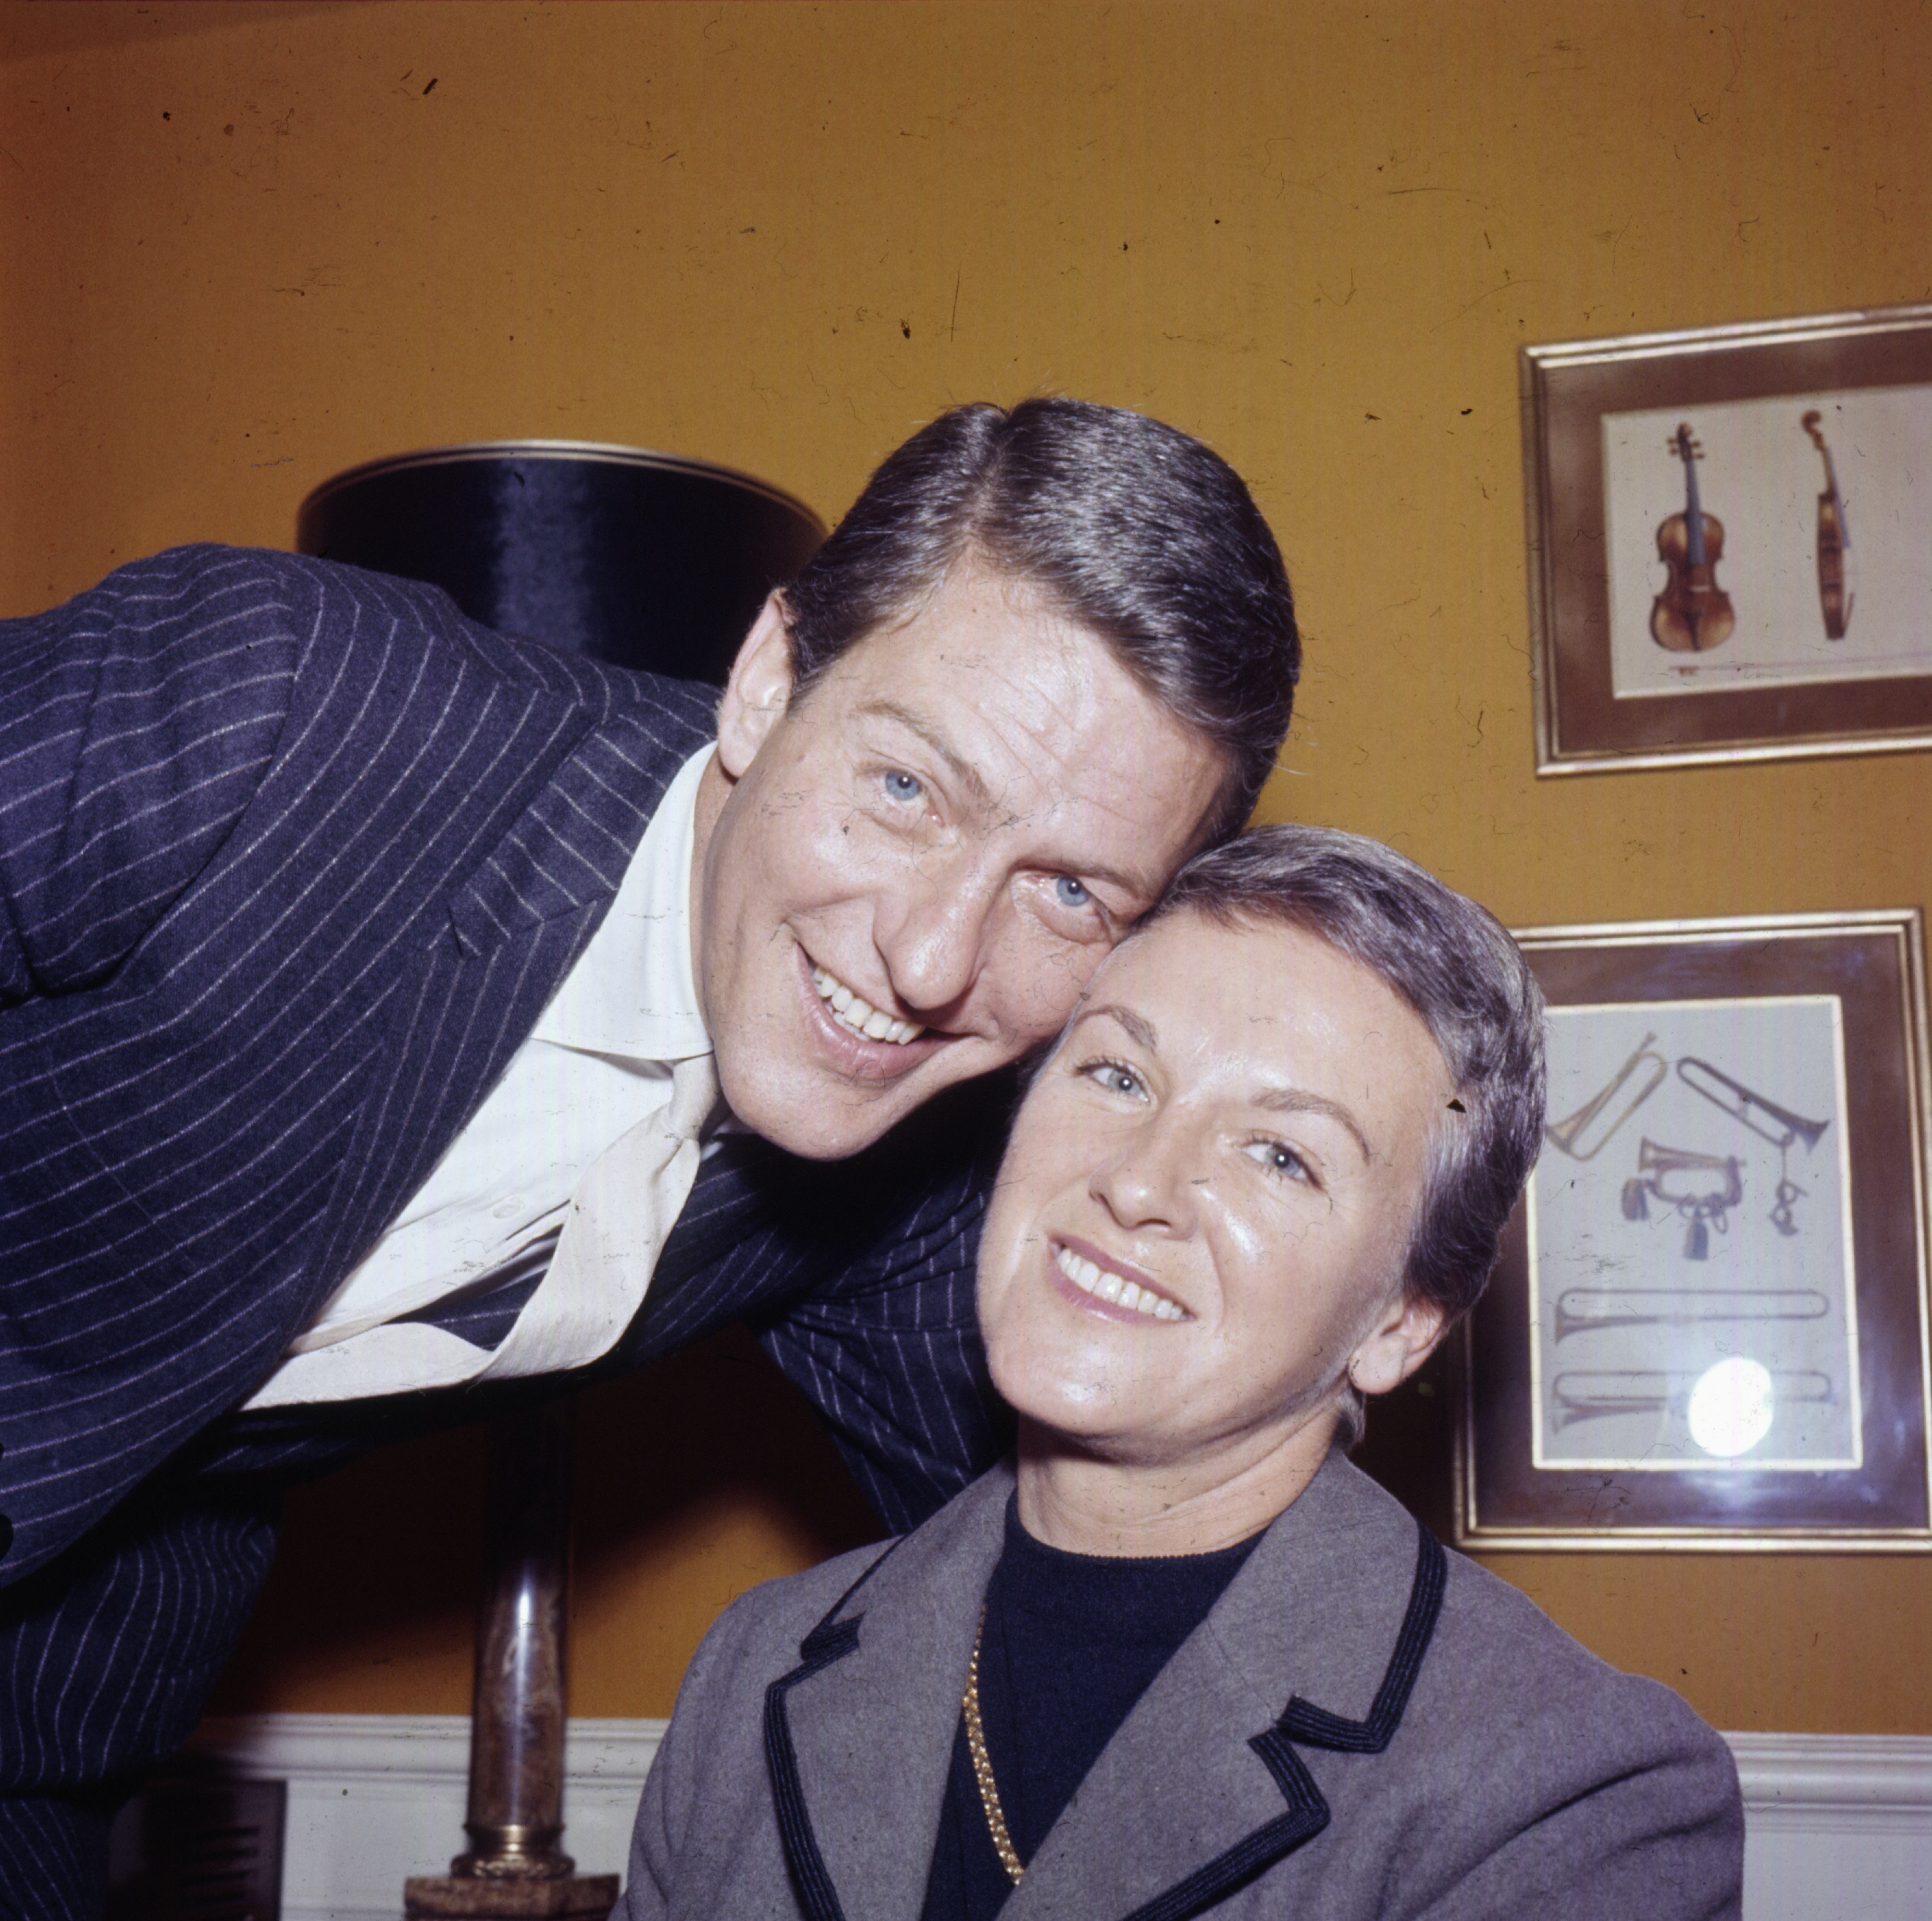 Dick Van Dyke pictured with his wife Margie Willett in 1964, in London. | Source: Getty Images